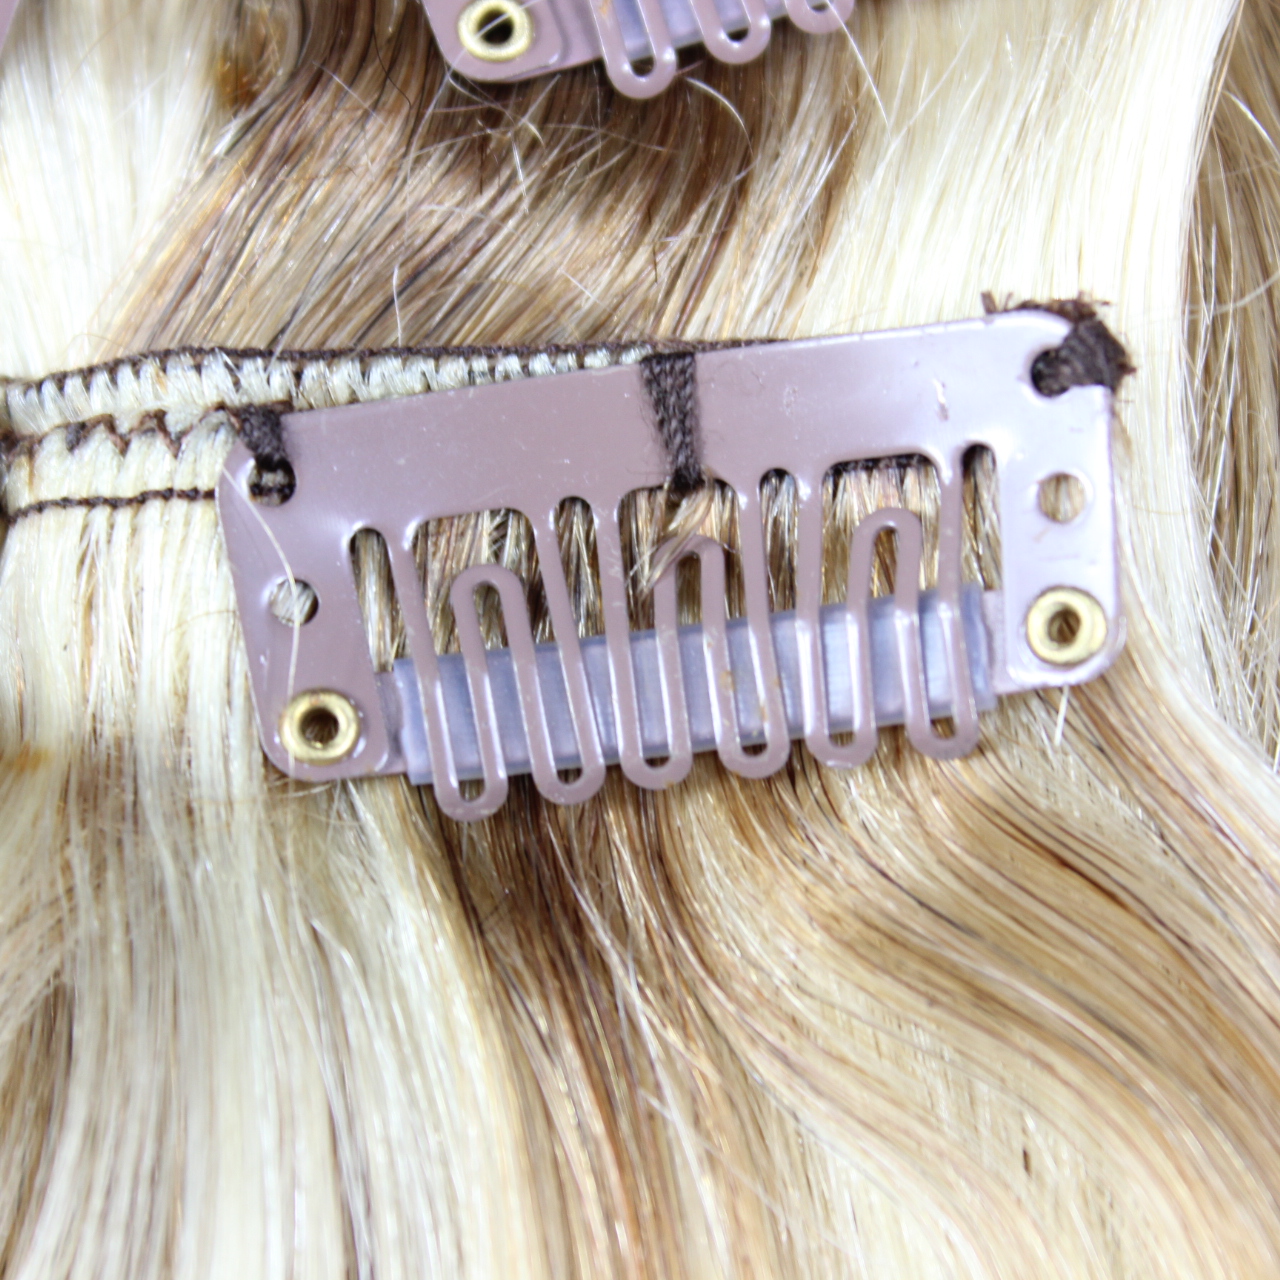 P-color double drawn remy hair clip in hair extensions zj0033